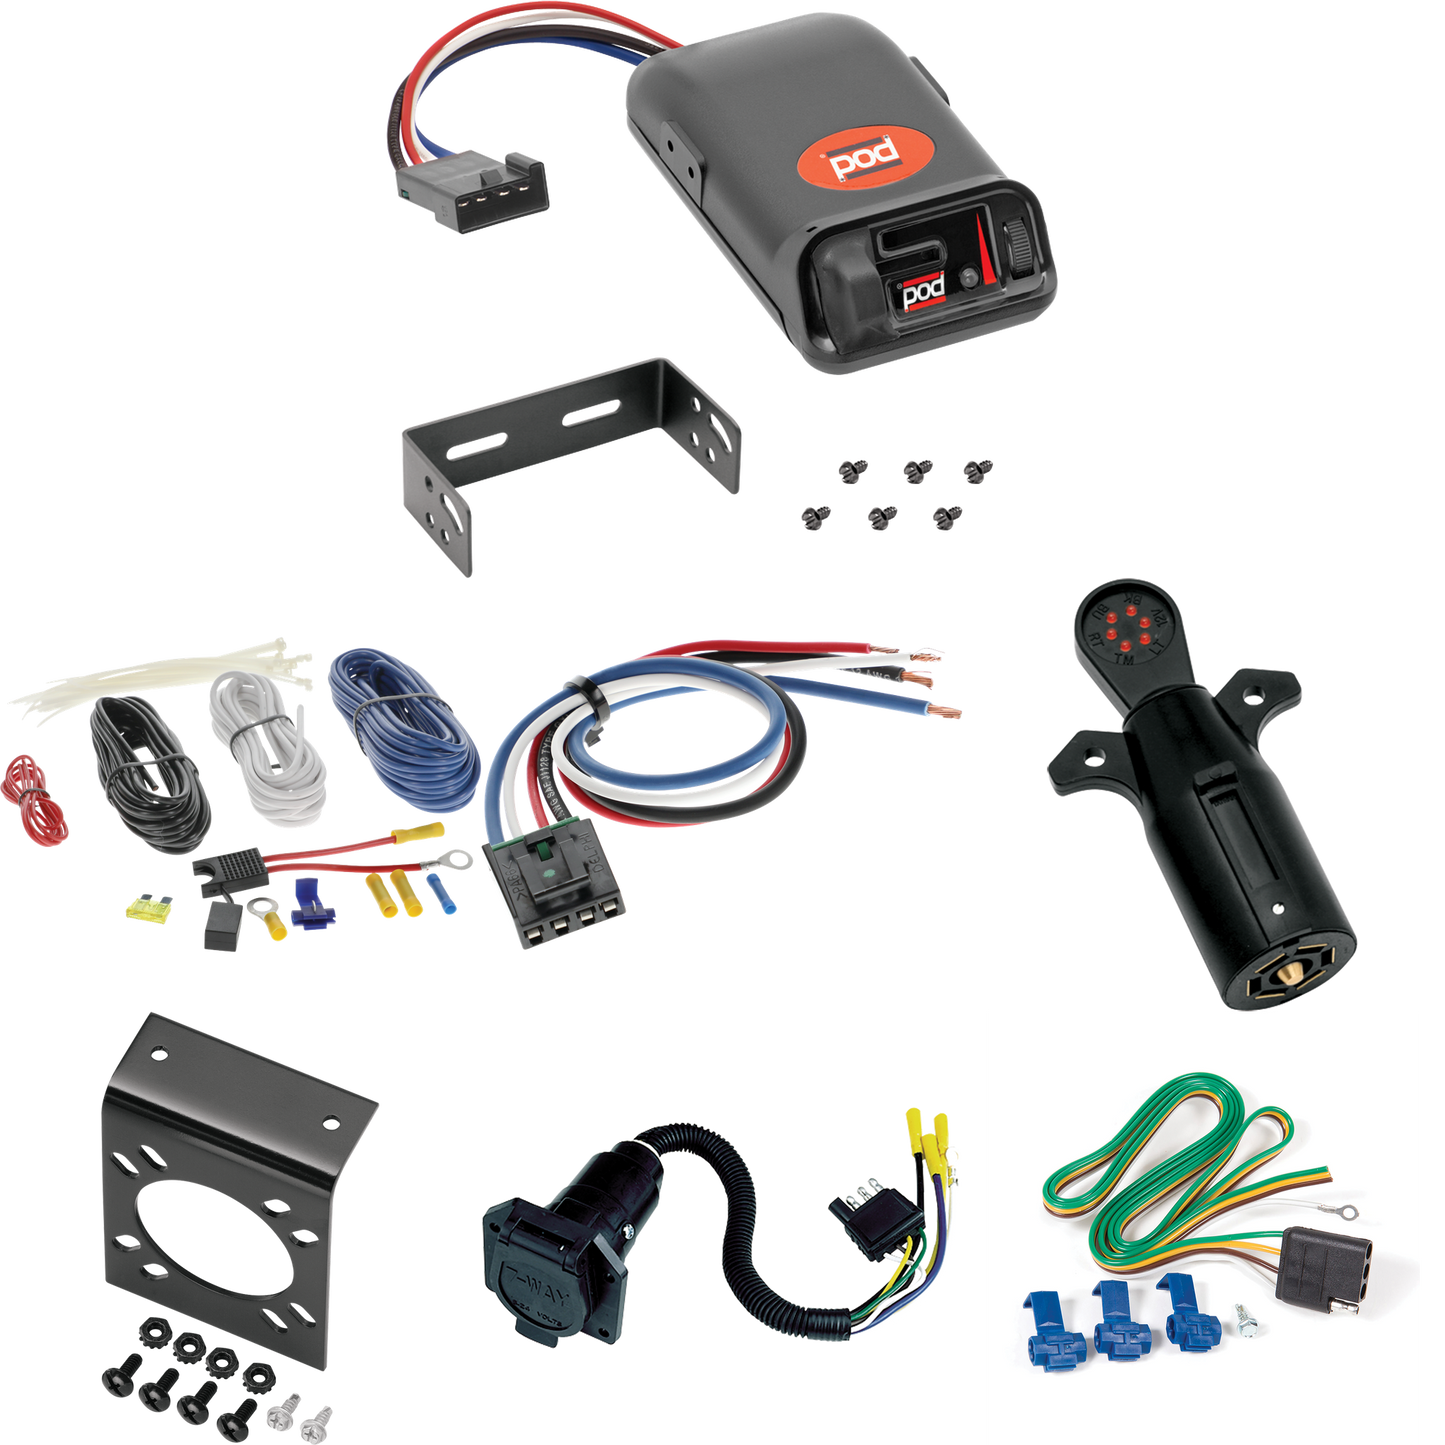 Fits 1999-1999 Cadillac Escalade 7-Way RV Wiring + Pro Series POD Brake Control + Generic BC Wiring Adapter + 7-Way Tester By Reese Towpower